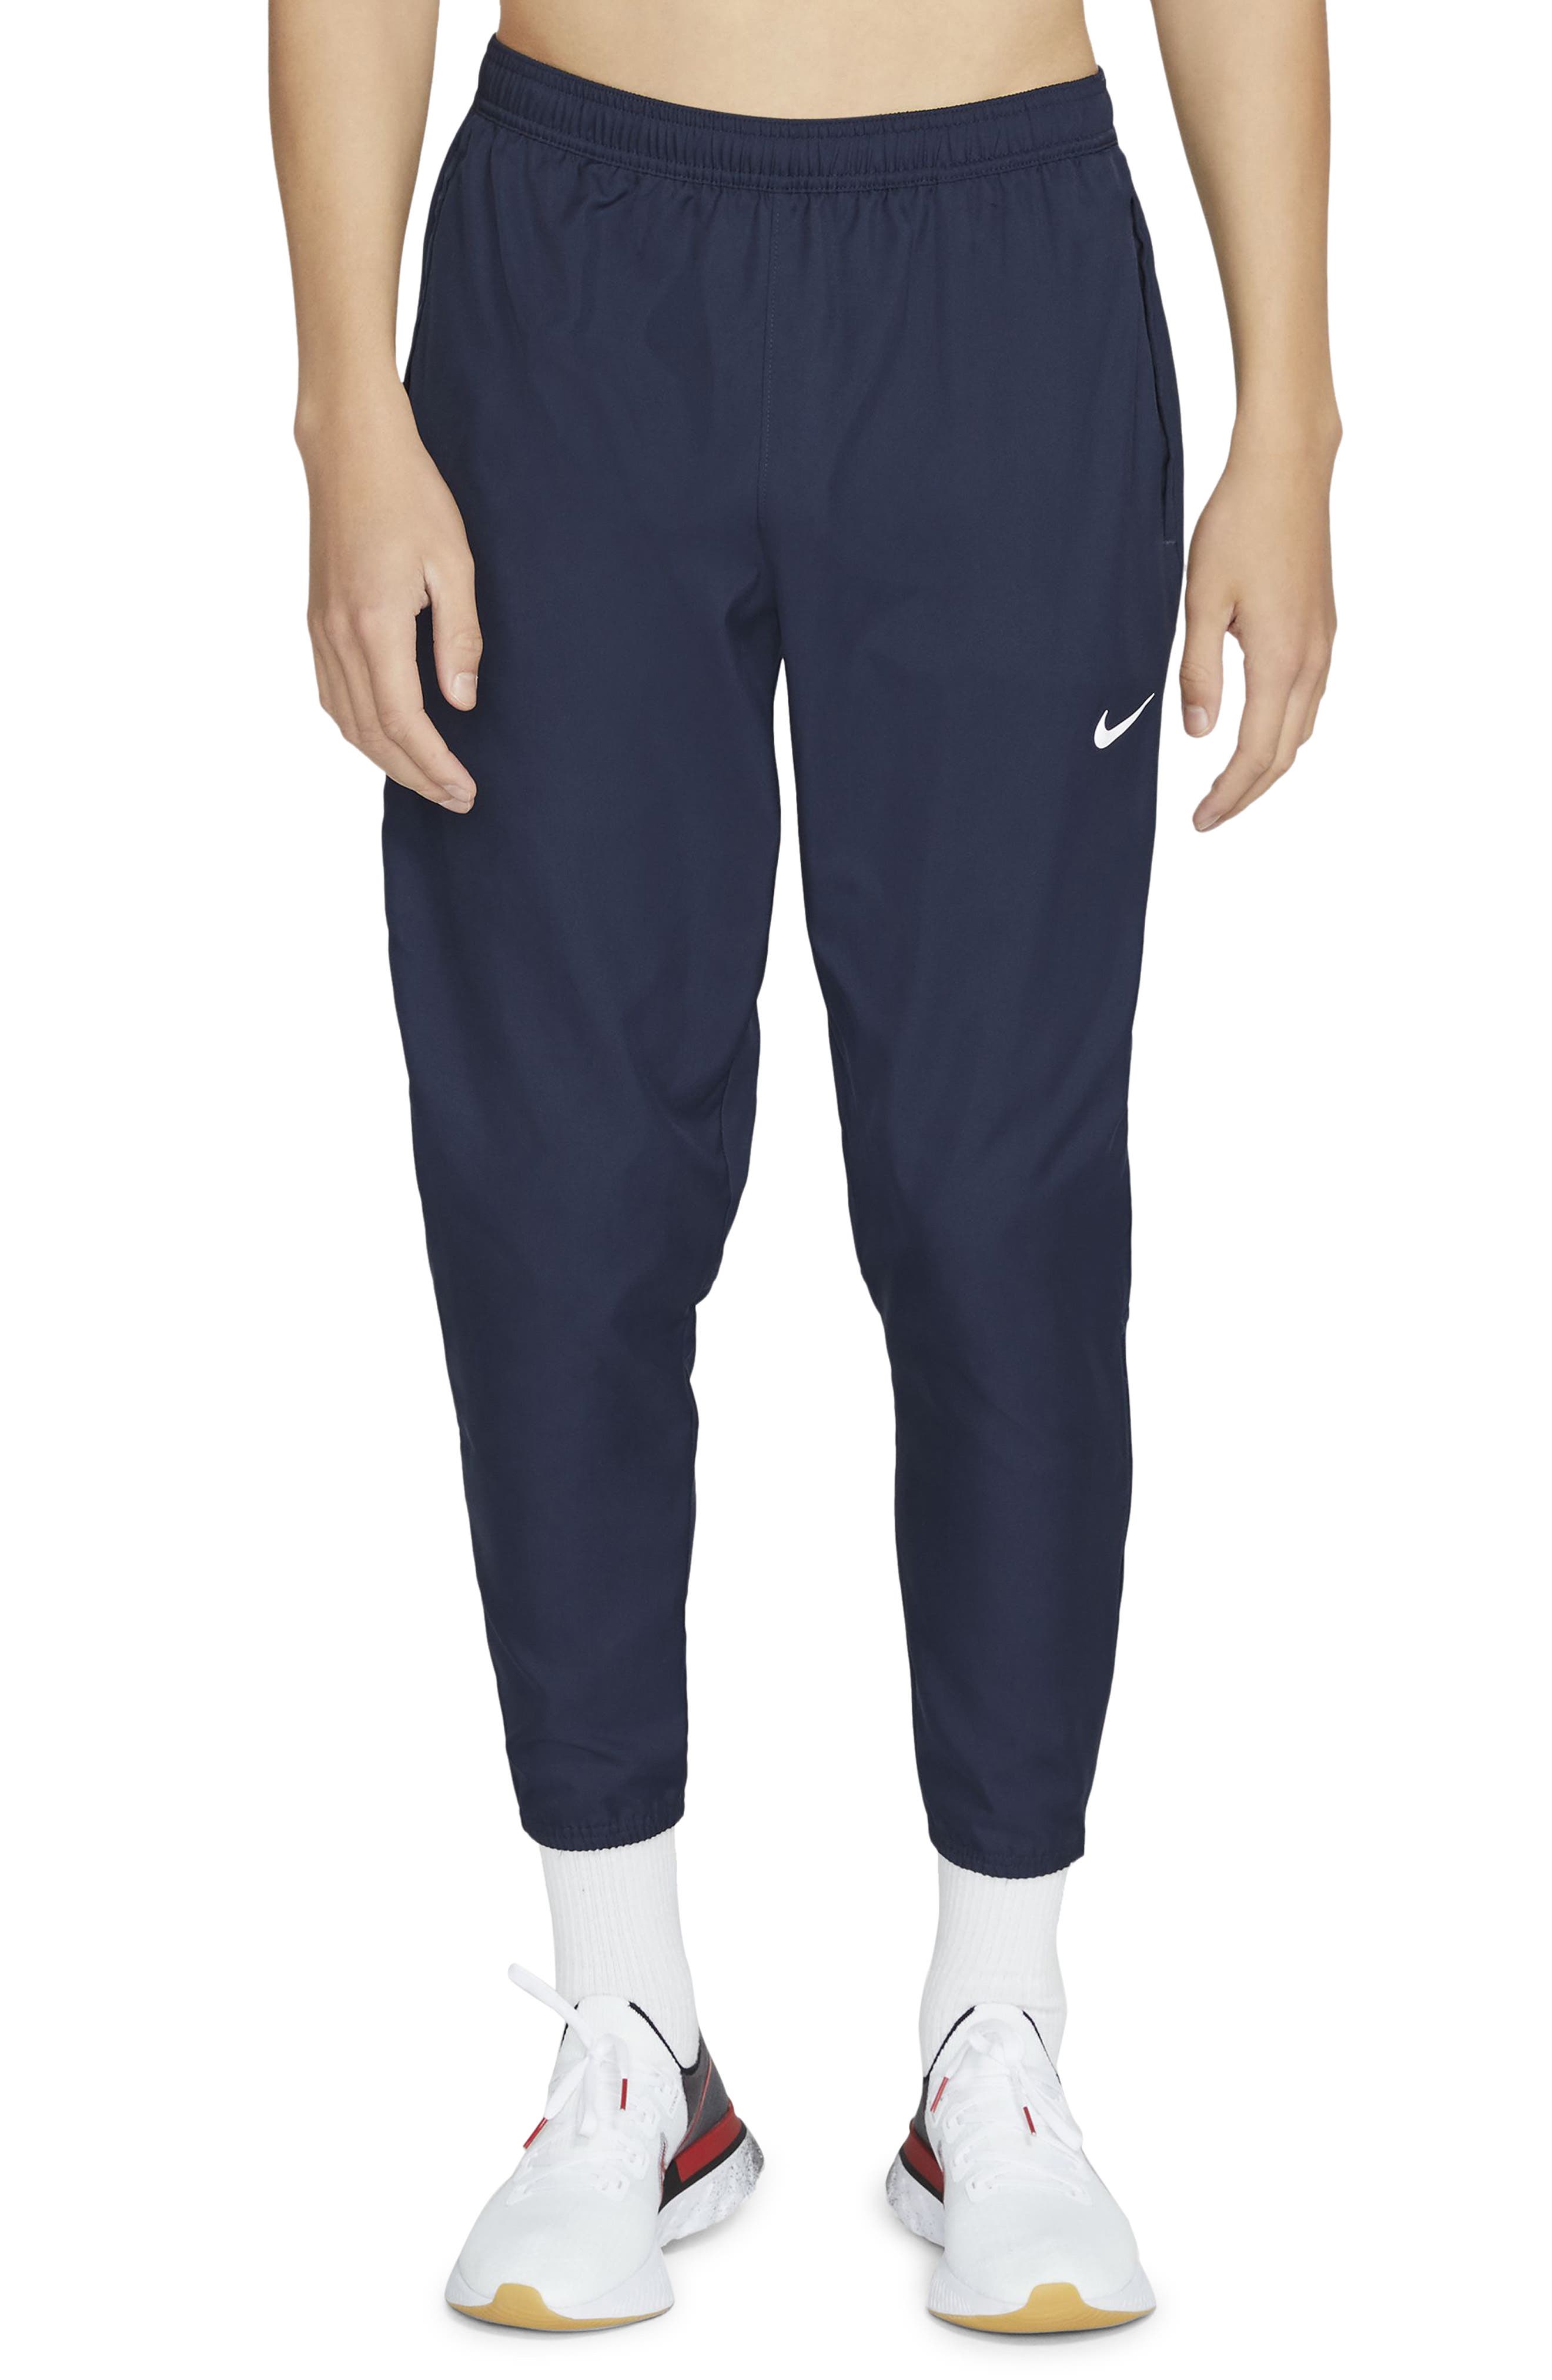 nike sweatsuit mens big and tall